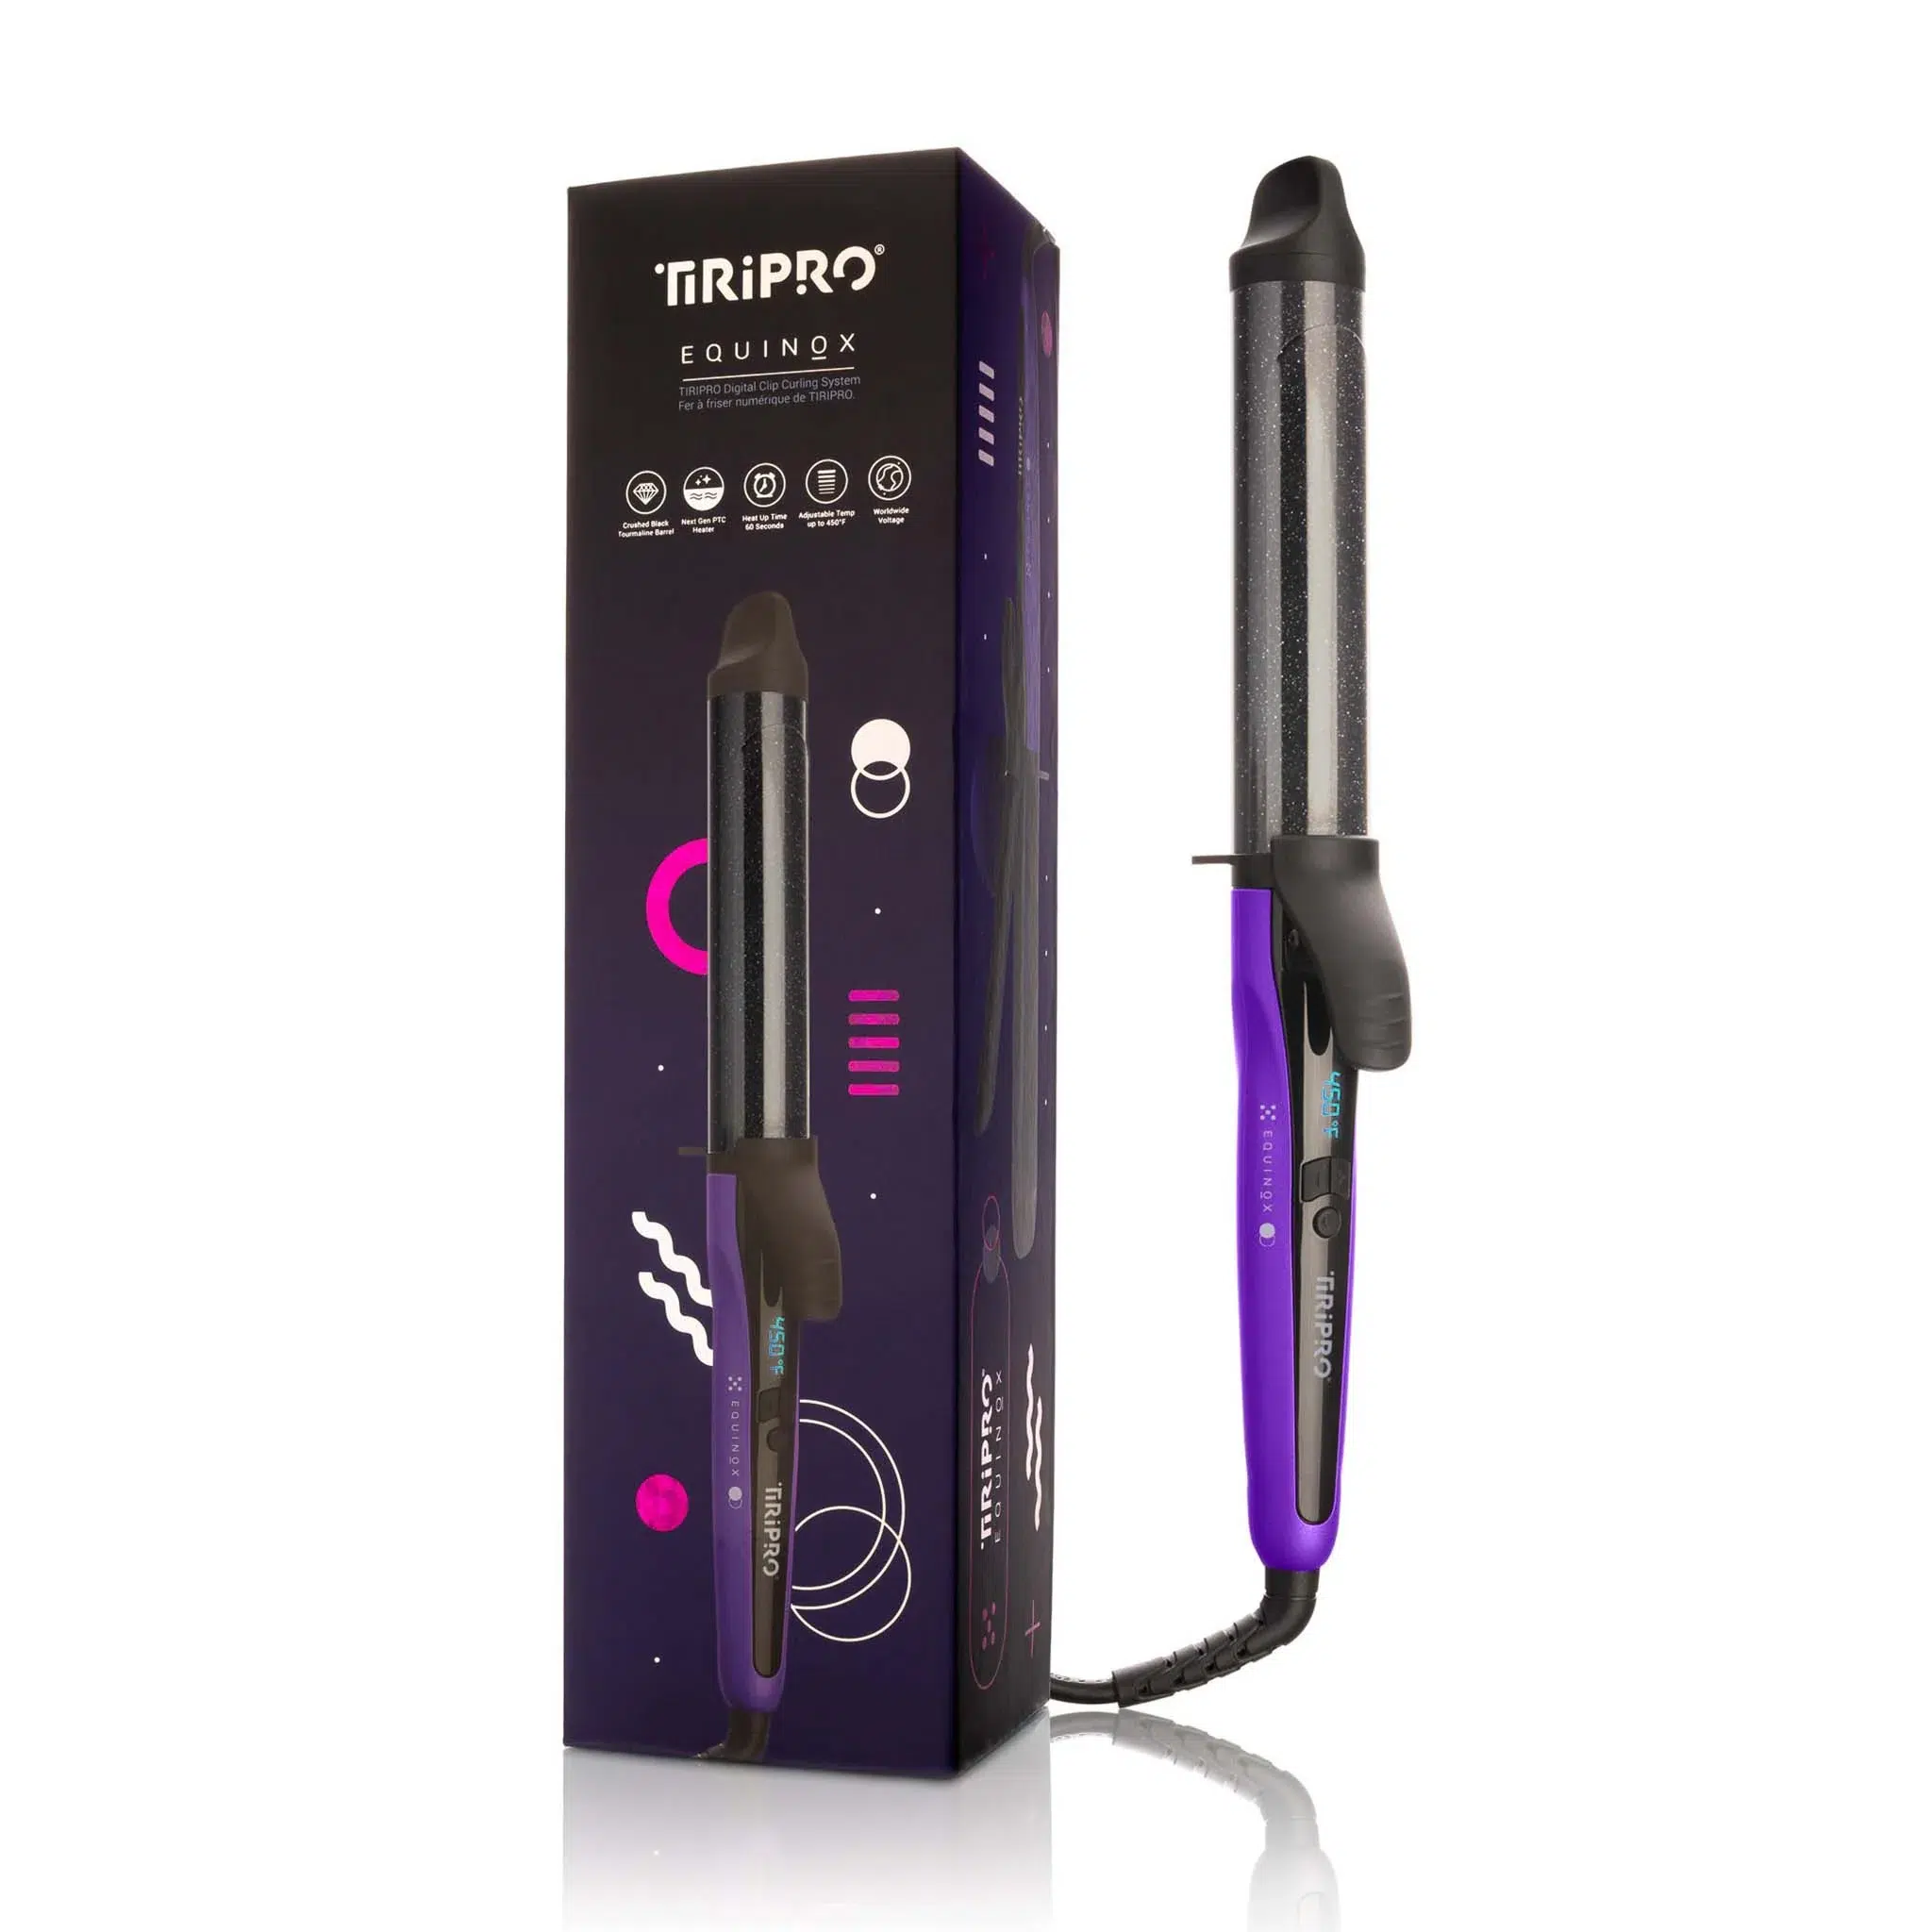 Hair curling technology Hair care accessories